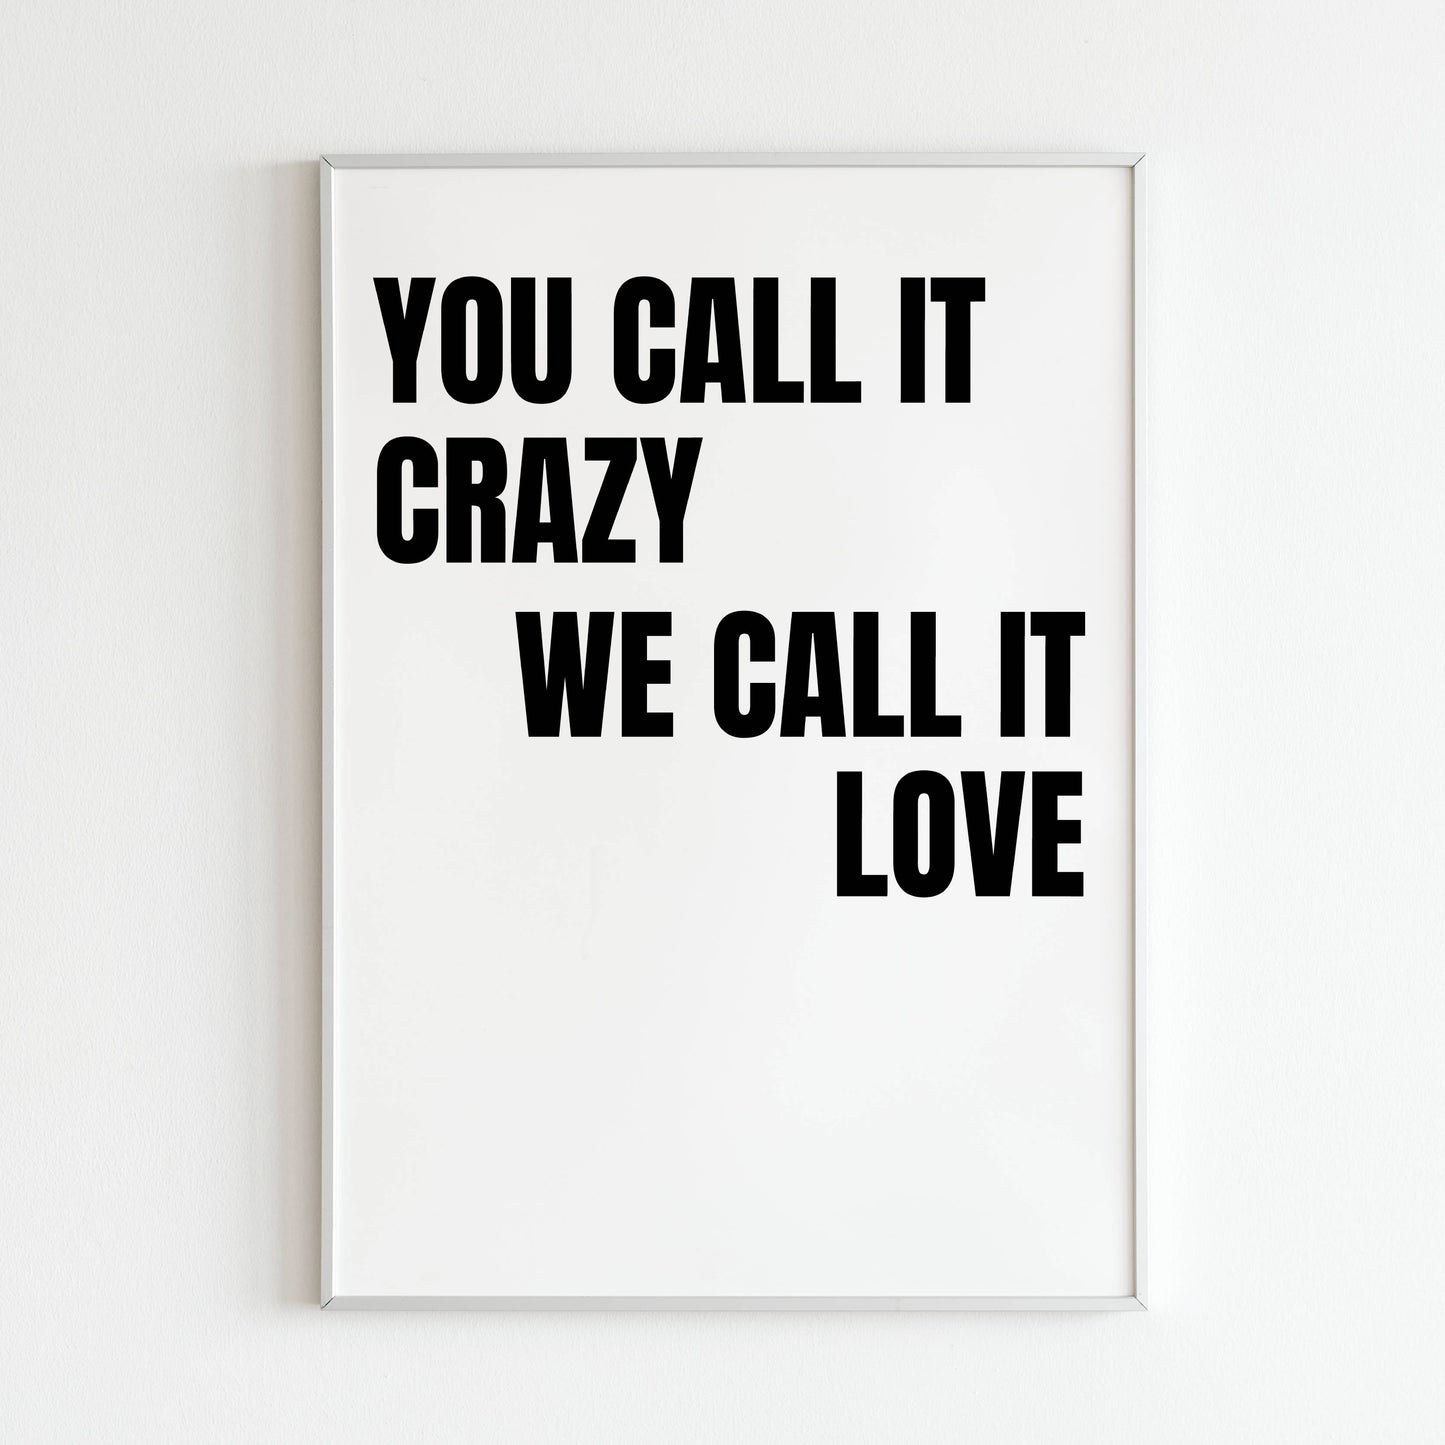 Downloadable "You call it crazy we call it love" art print, express your love and appreciation for someone special, even if it seems unconventional.